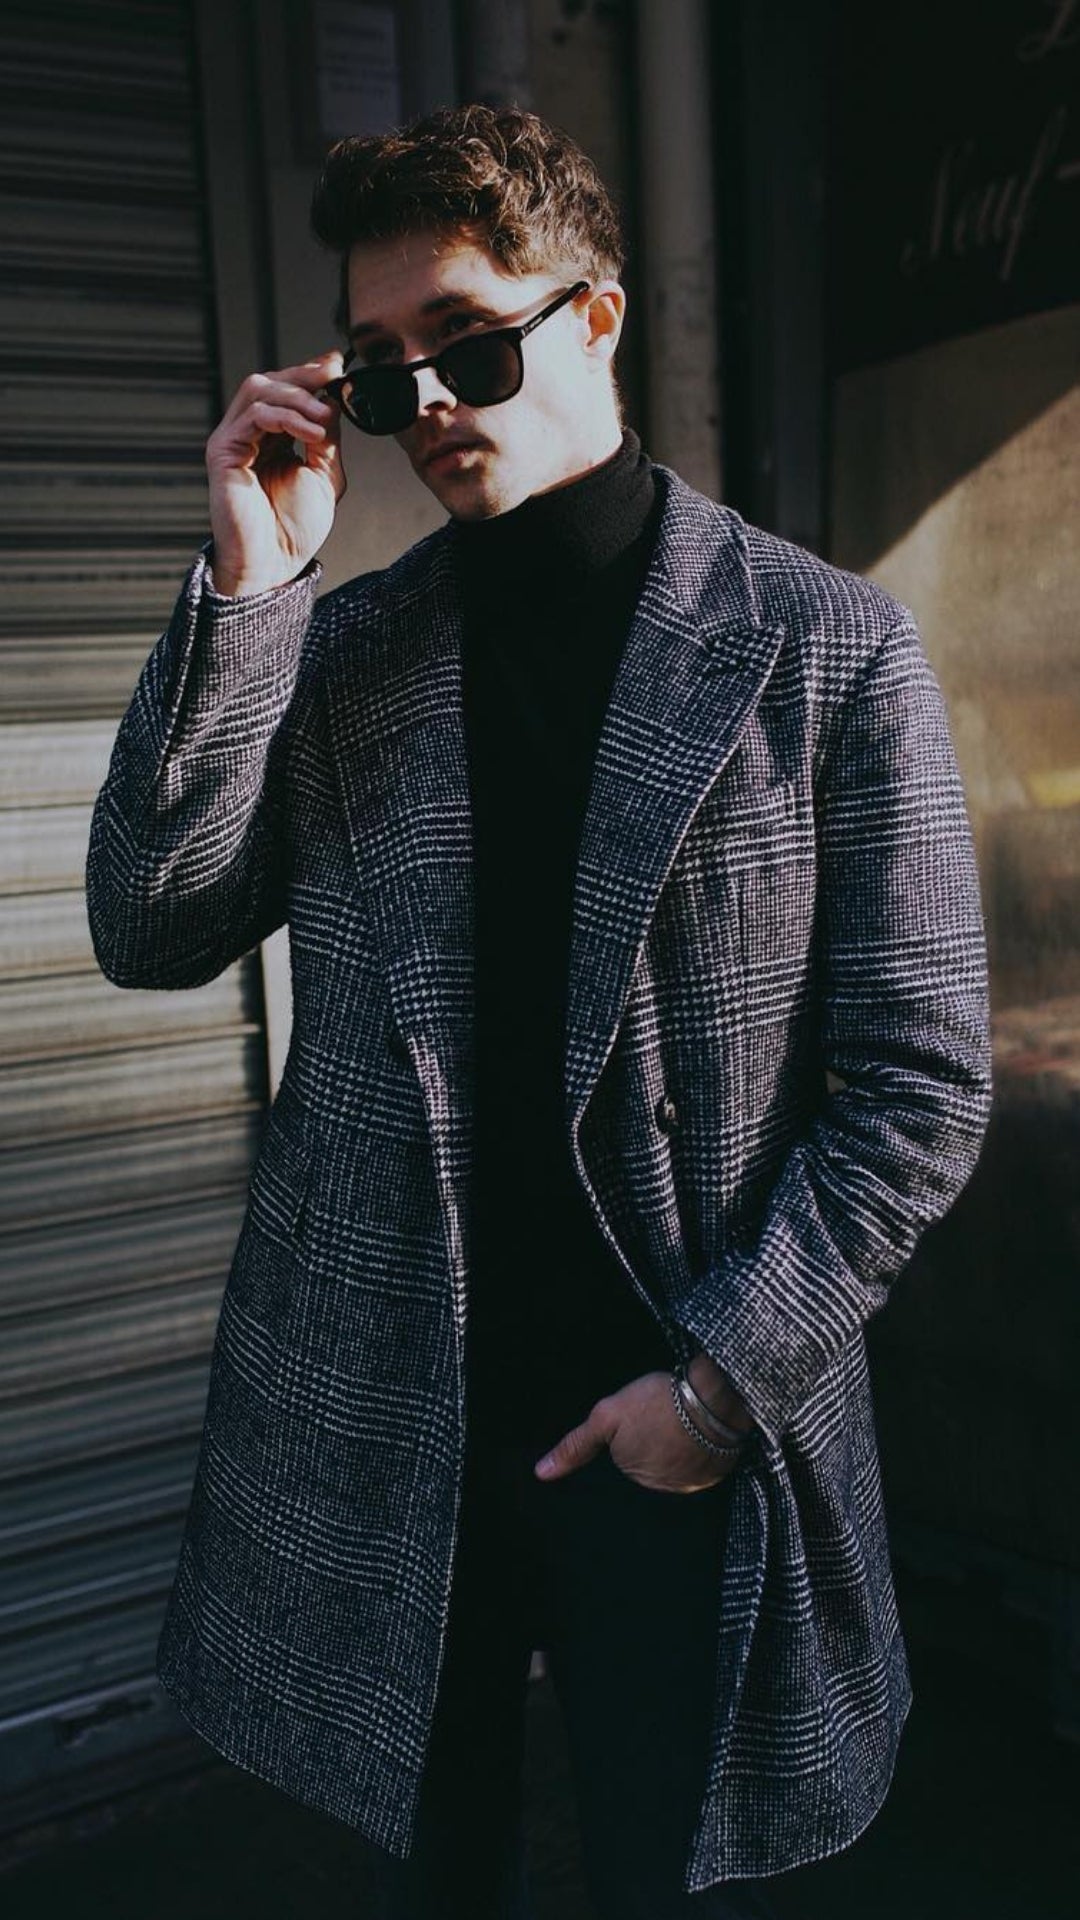 5 Amazing Outfits To Elevate Your Winter Style Game #winterstyle #mensfashion #streetstyle